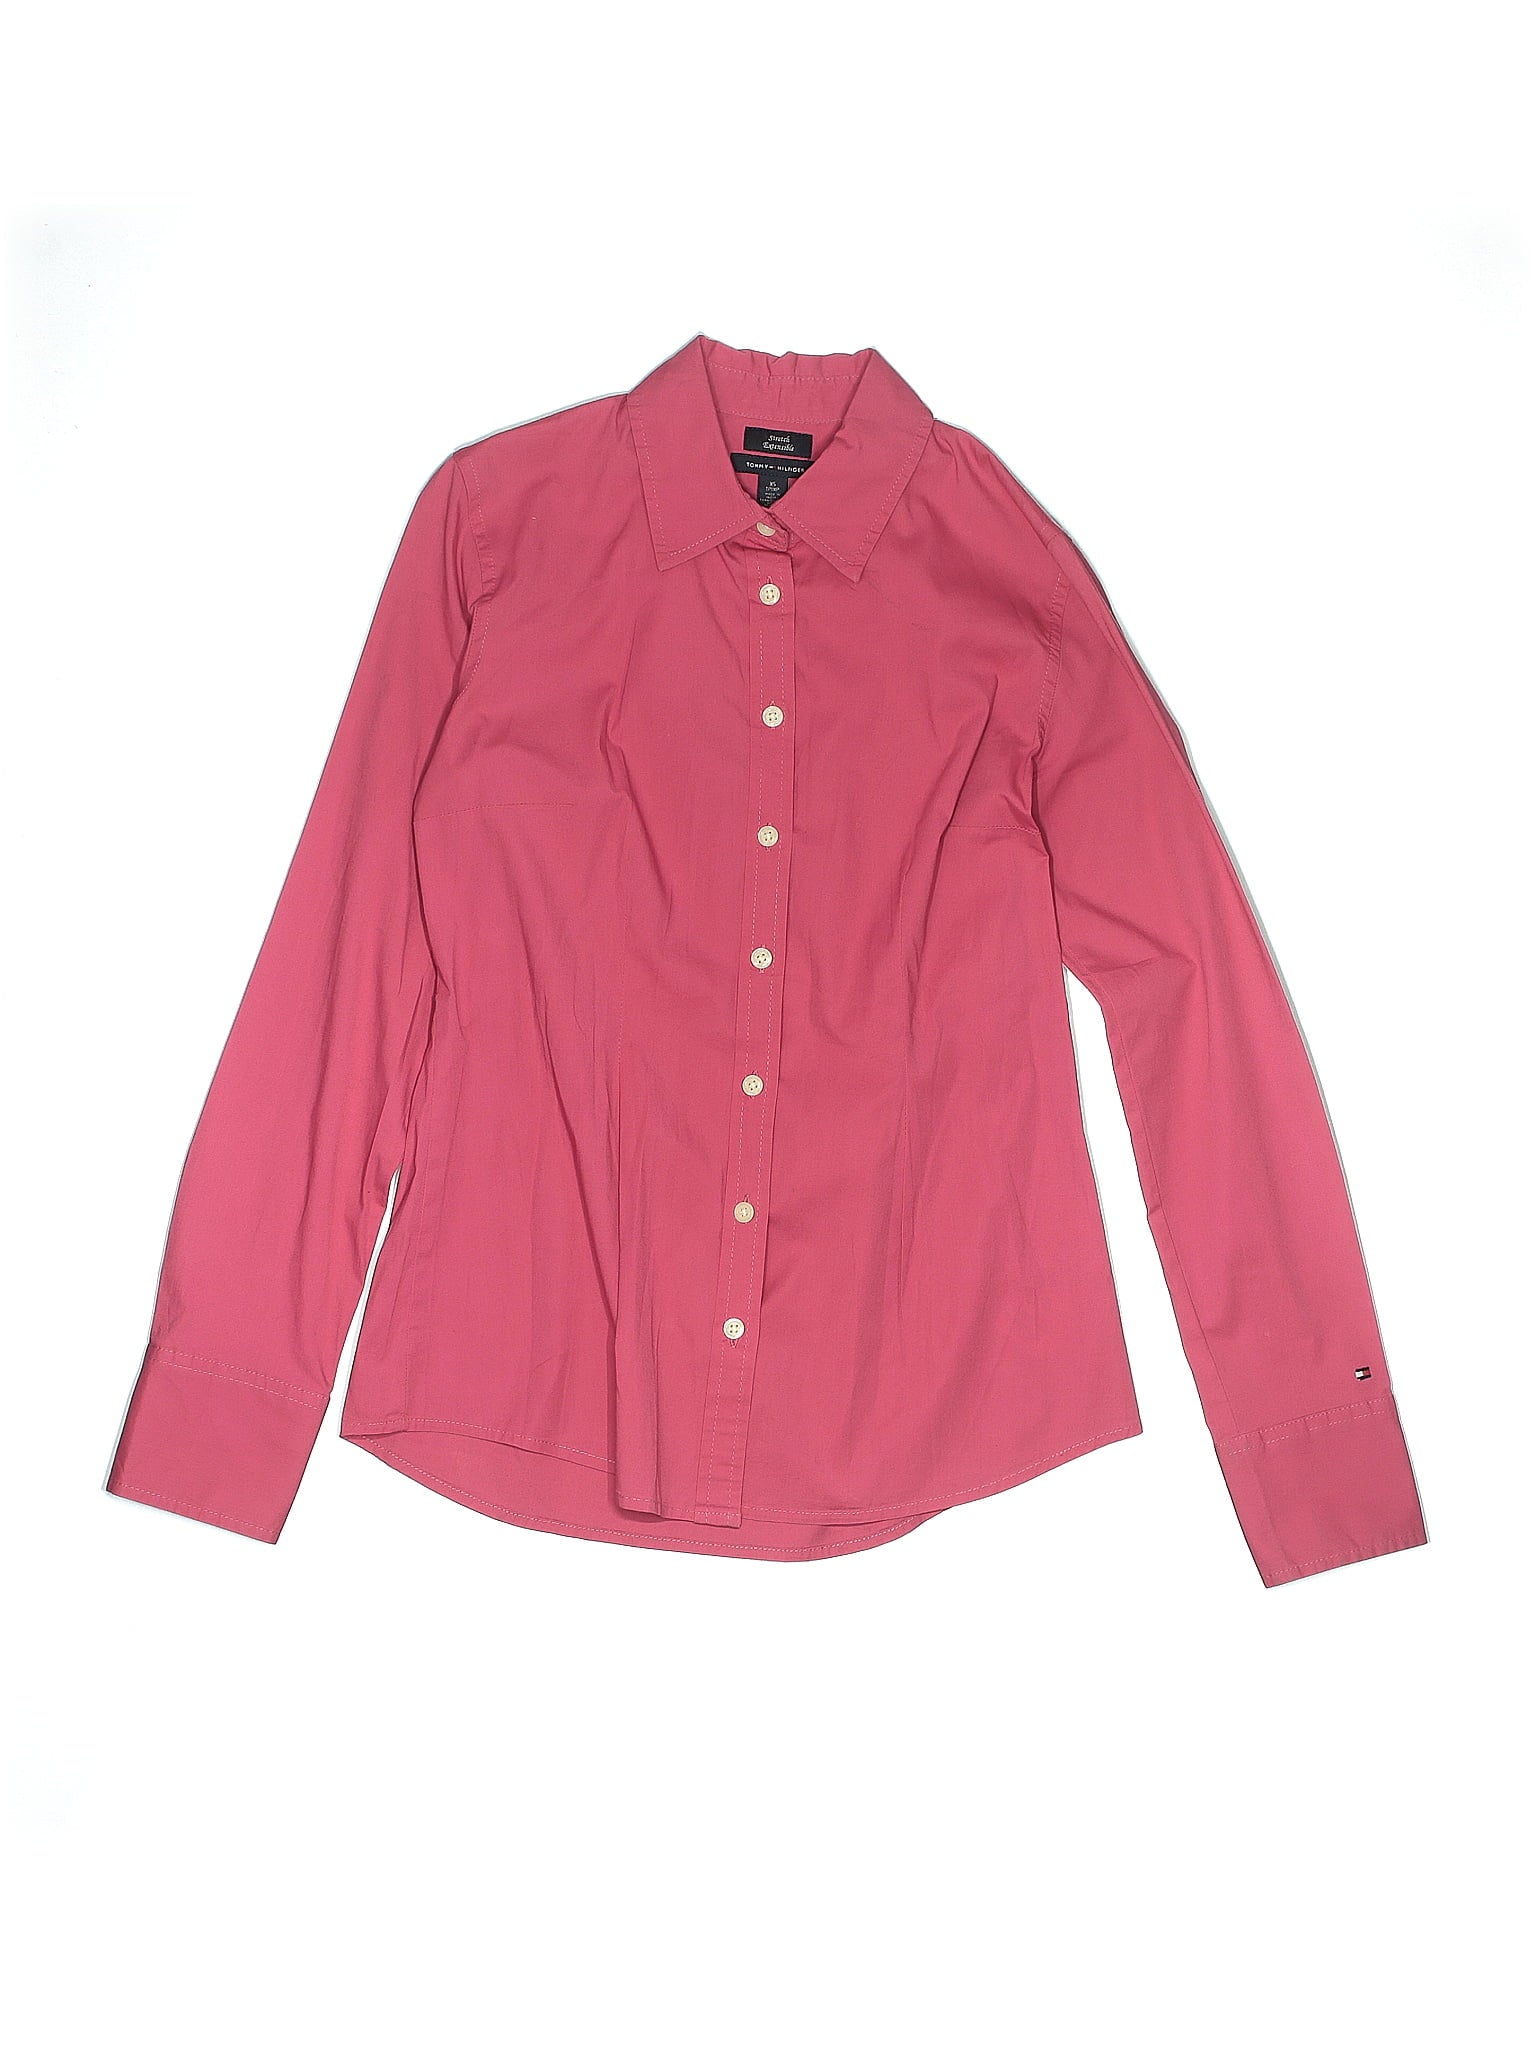 Long Sleeve Button Down Shirt size - X-Small (Youth)